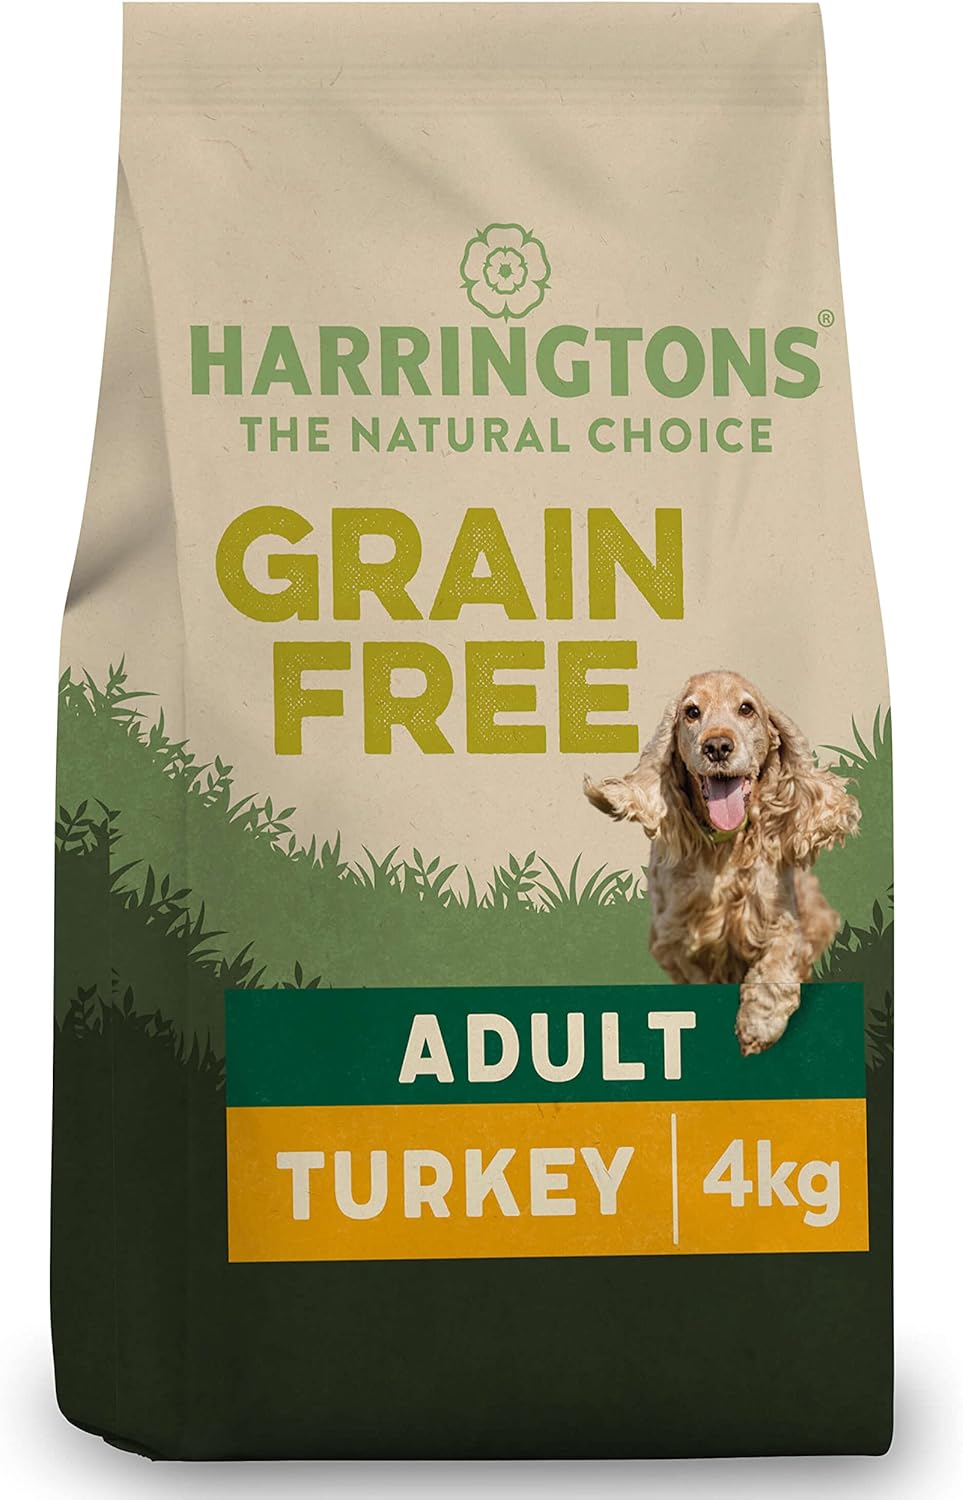 Harringtons Complete Grain Free Hypoallergenic Turkey & Sweet Potato Dry Adult Dog Food 4kg (Pack of 3) - Made with All Natural Ingredients?GFHYPT-C4